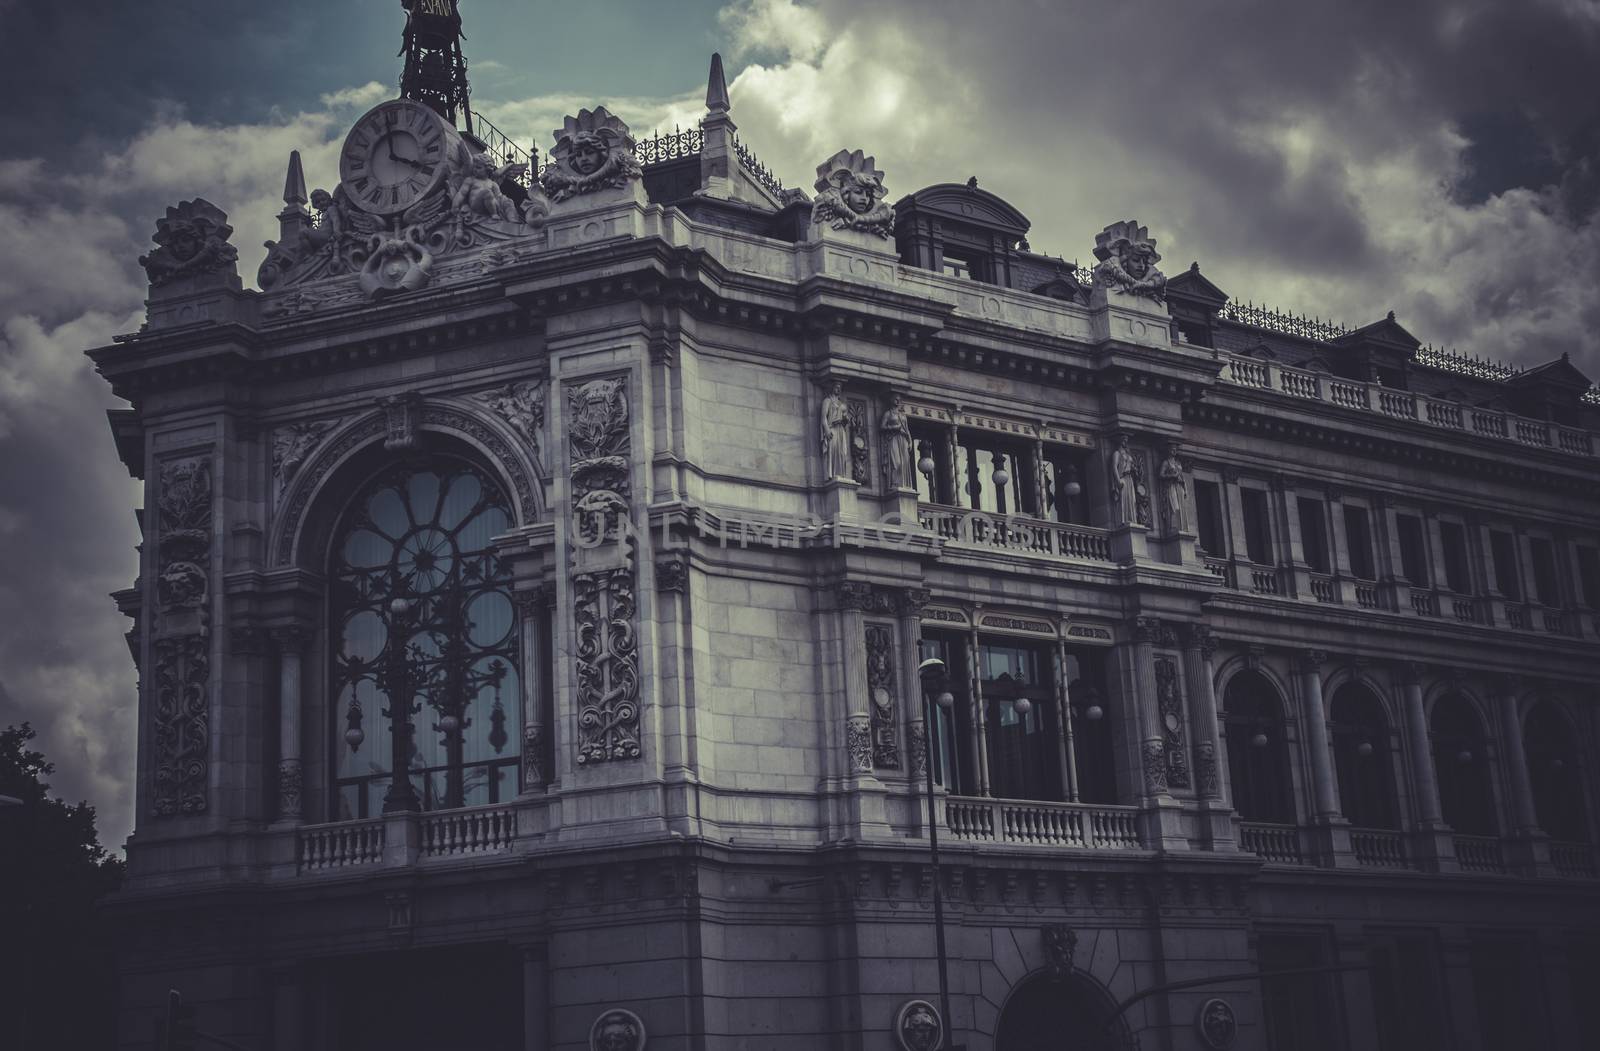 Banco de Espa��a, Image of the city of Madrid, its characteristic architecture